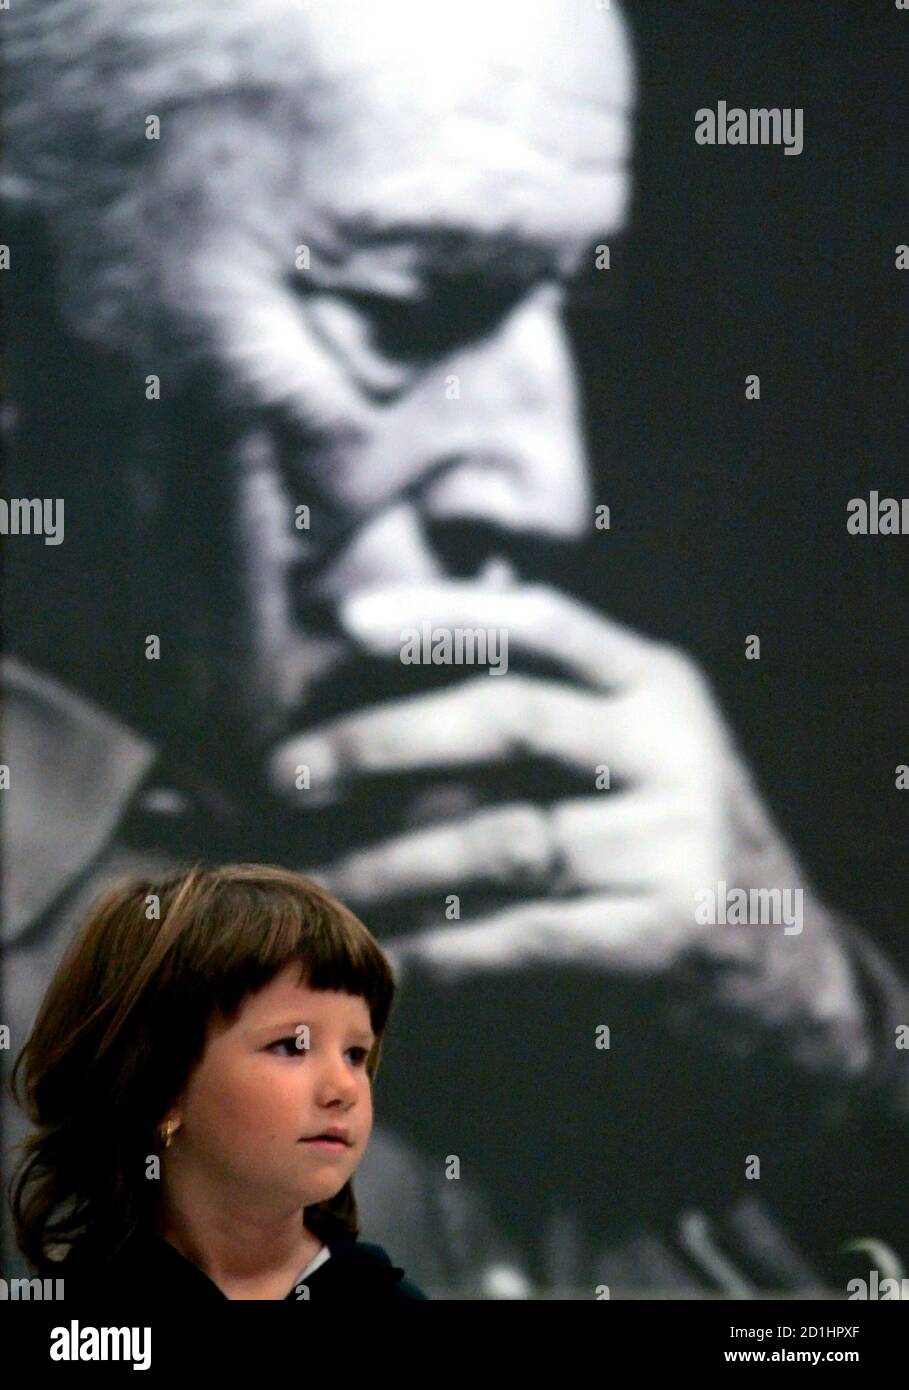 Nausica, the niece of late Italian director Michelangelo Antonioni, looks on near a portrait of her uncle at Rome's City Hall August 1, 2007.  Antonioni, one of Italy's most influential post-war film directors whose portrayals of modern angst and alienation won him a cult following, died July 31, aged 94. REUTERS/Alessandro Bianchi  (ITALY) Stock Photo